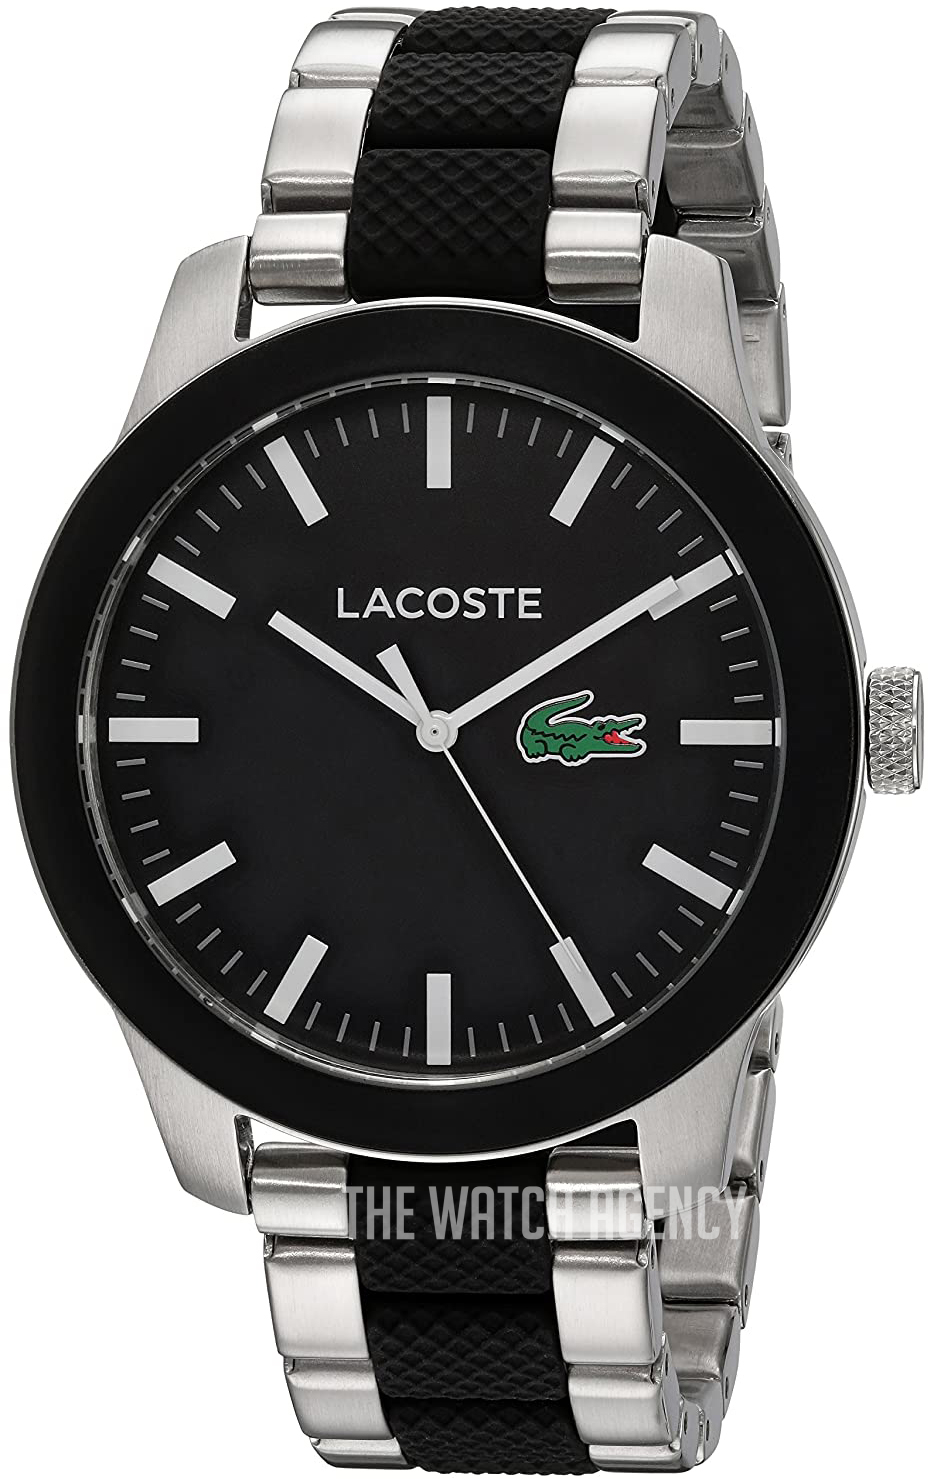 2010890 Lacoste | TheWatchAgency™